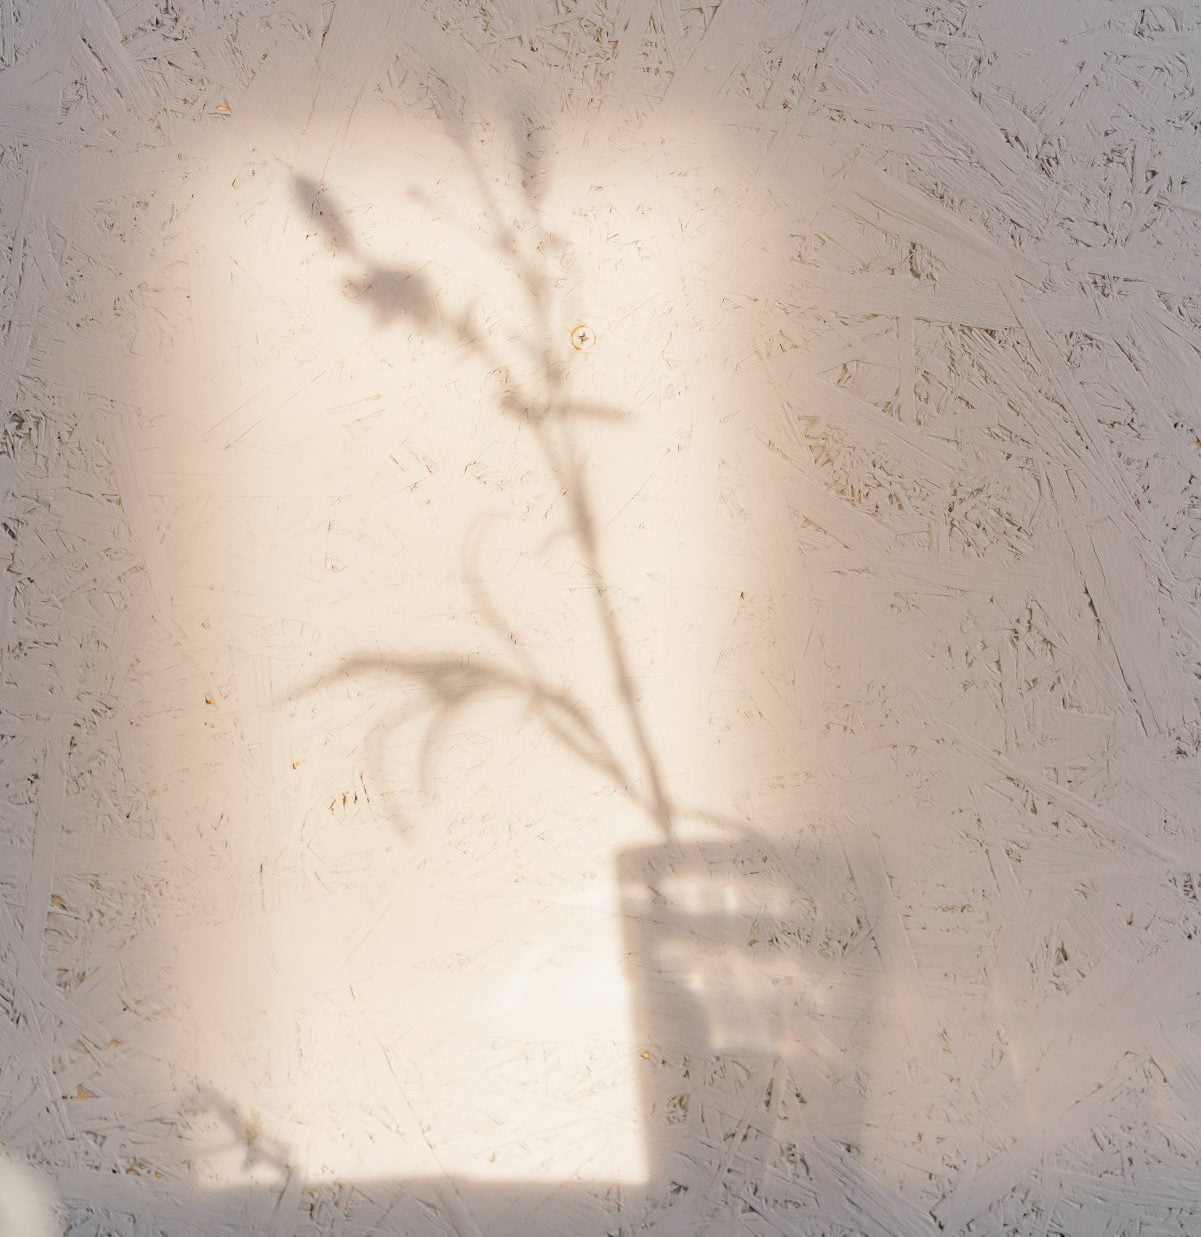 Shadow on the wall of a plant.